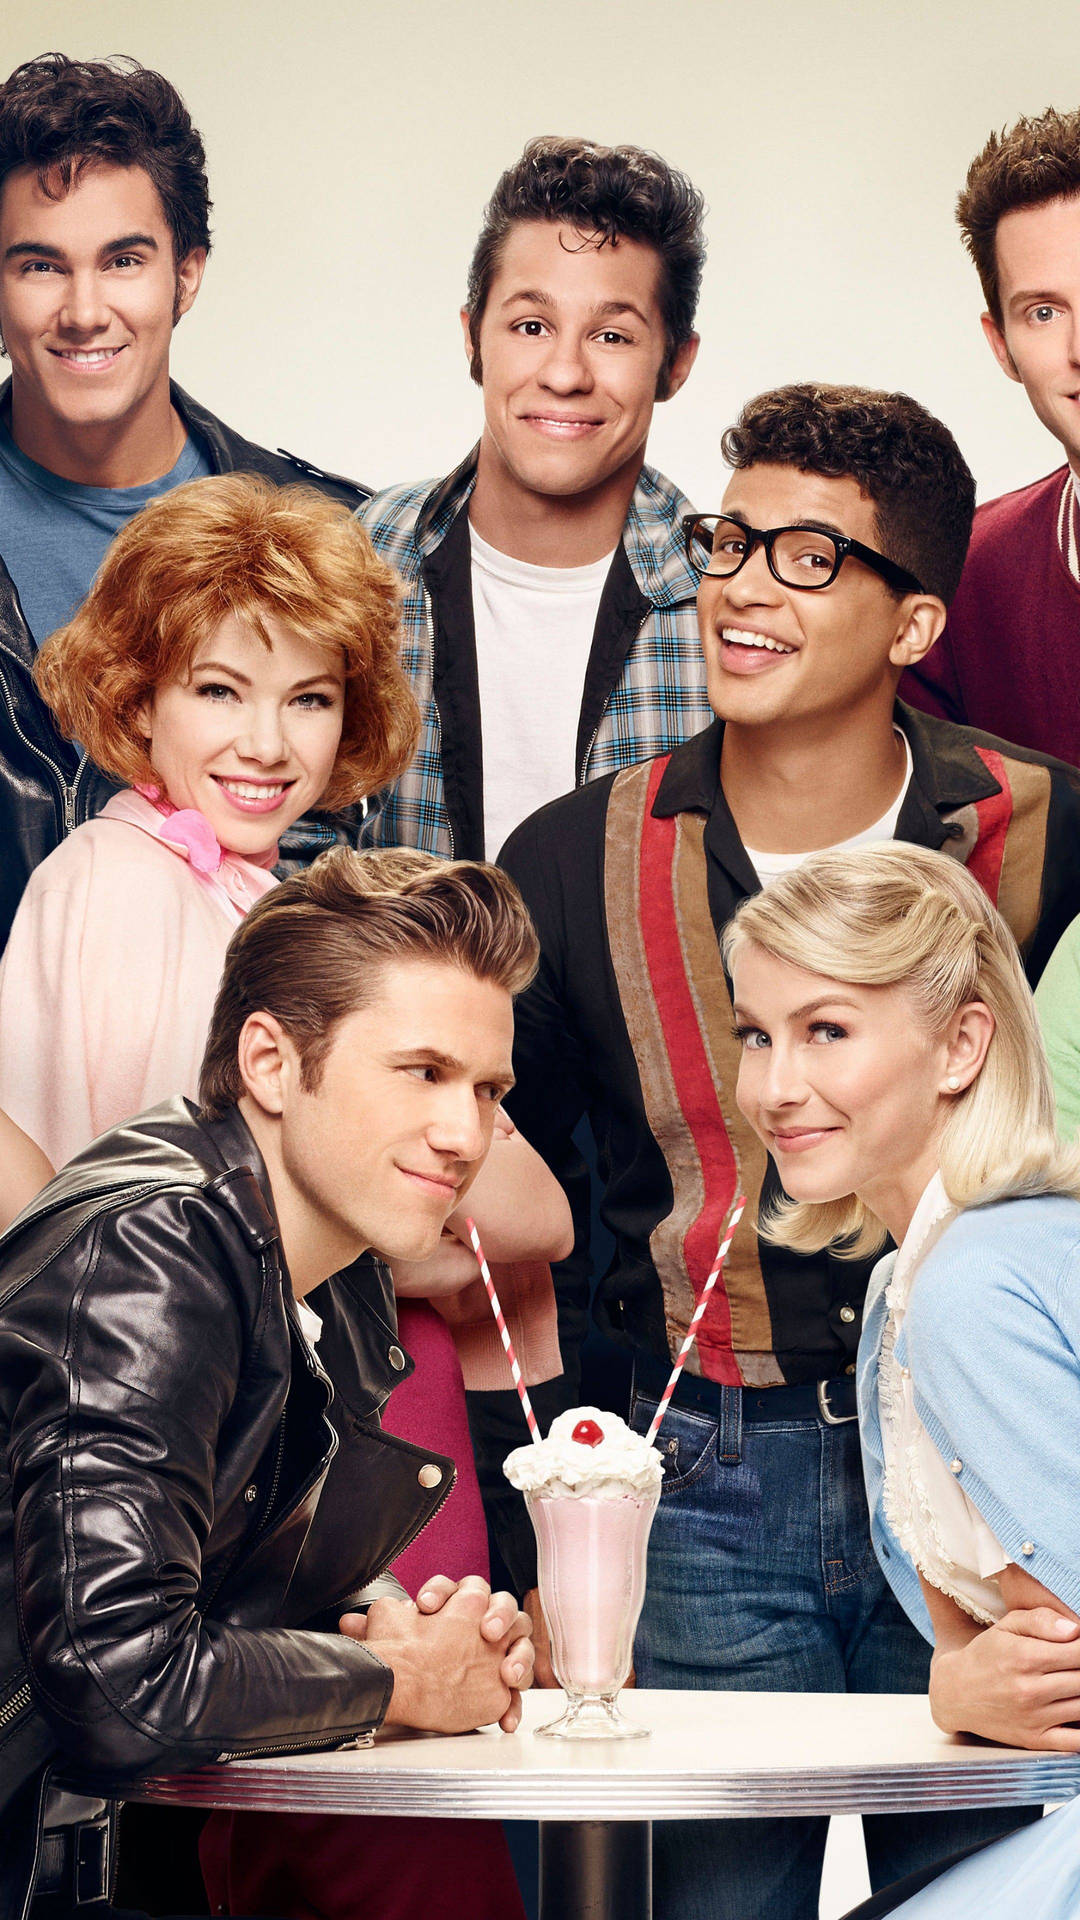 Grease Live High Quality Photograph Wallpaper